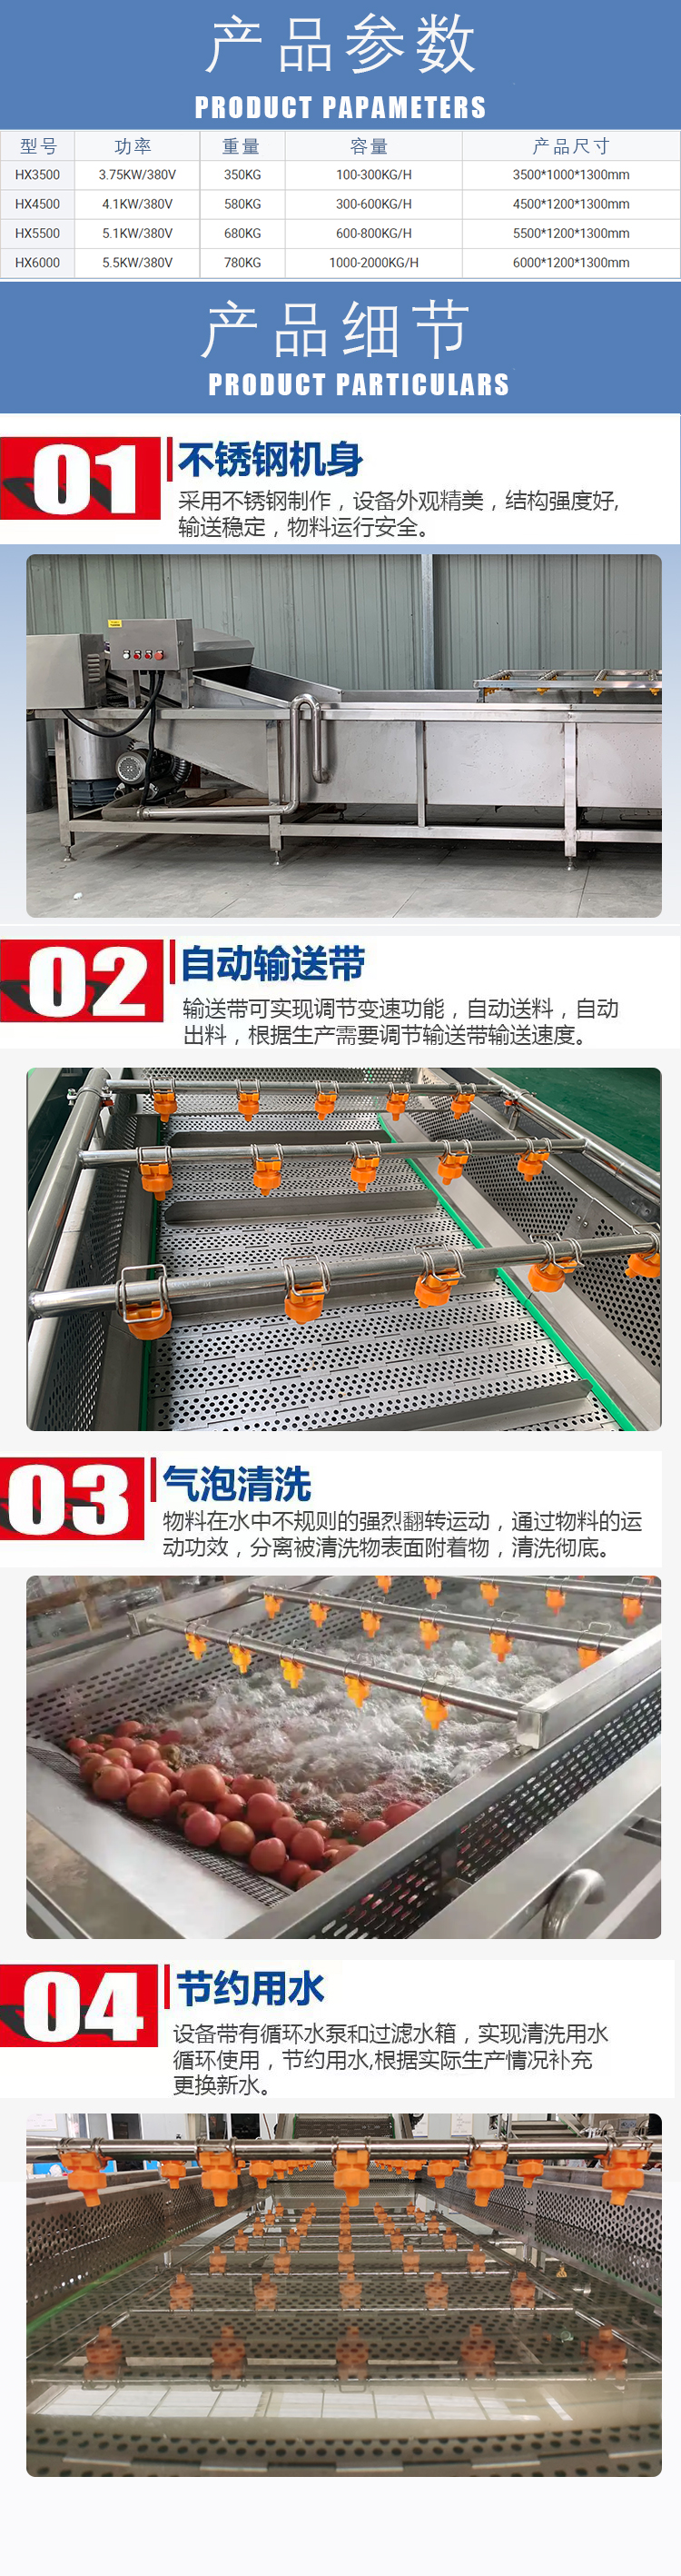 HOLSTEN fungus konjac cleaning machine vegetable and fruit drying and cleaning assembly line Huixin intelligent control